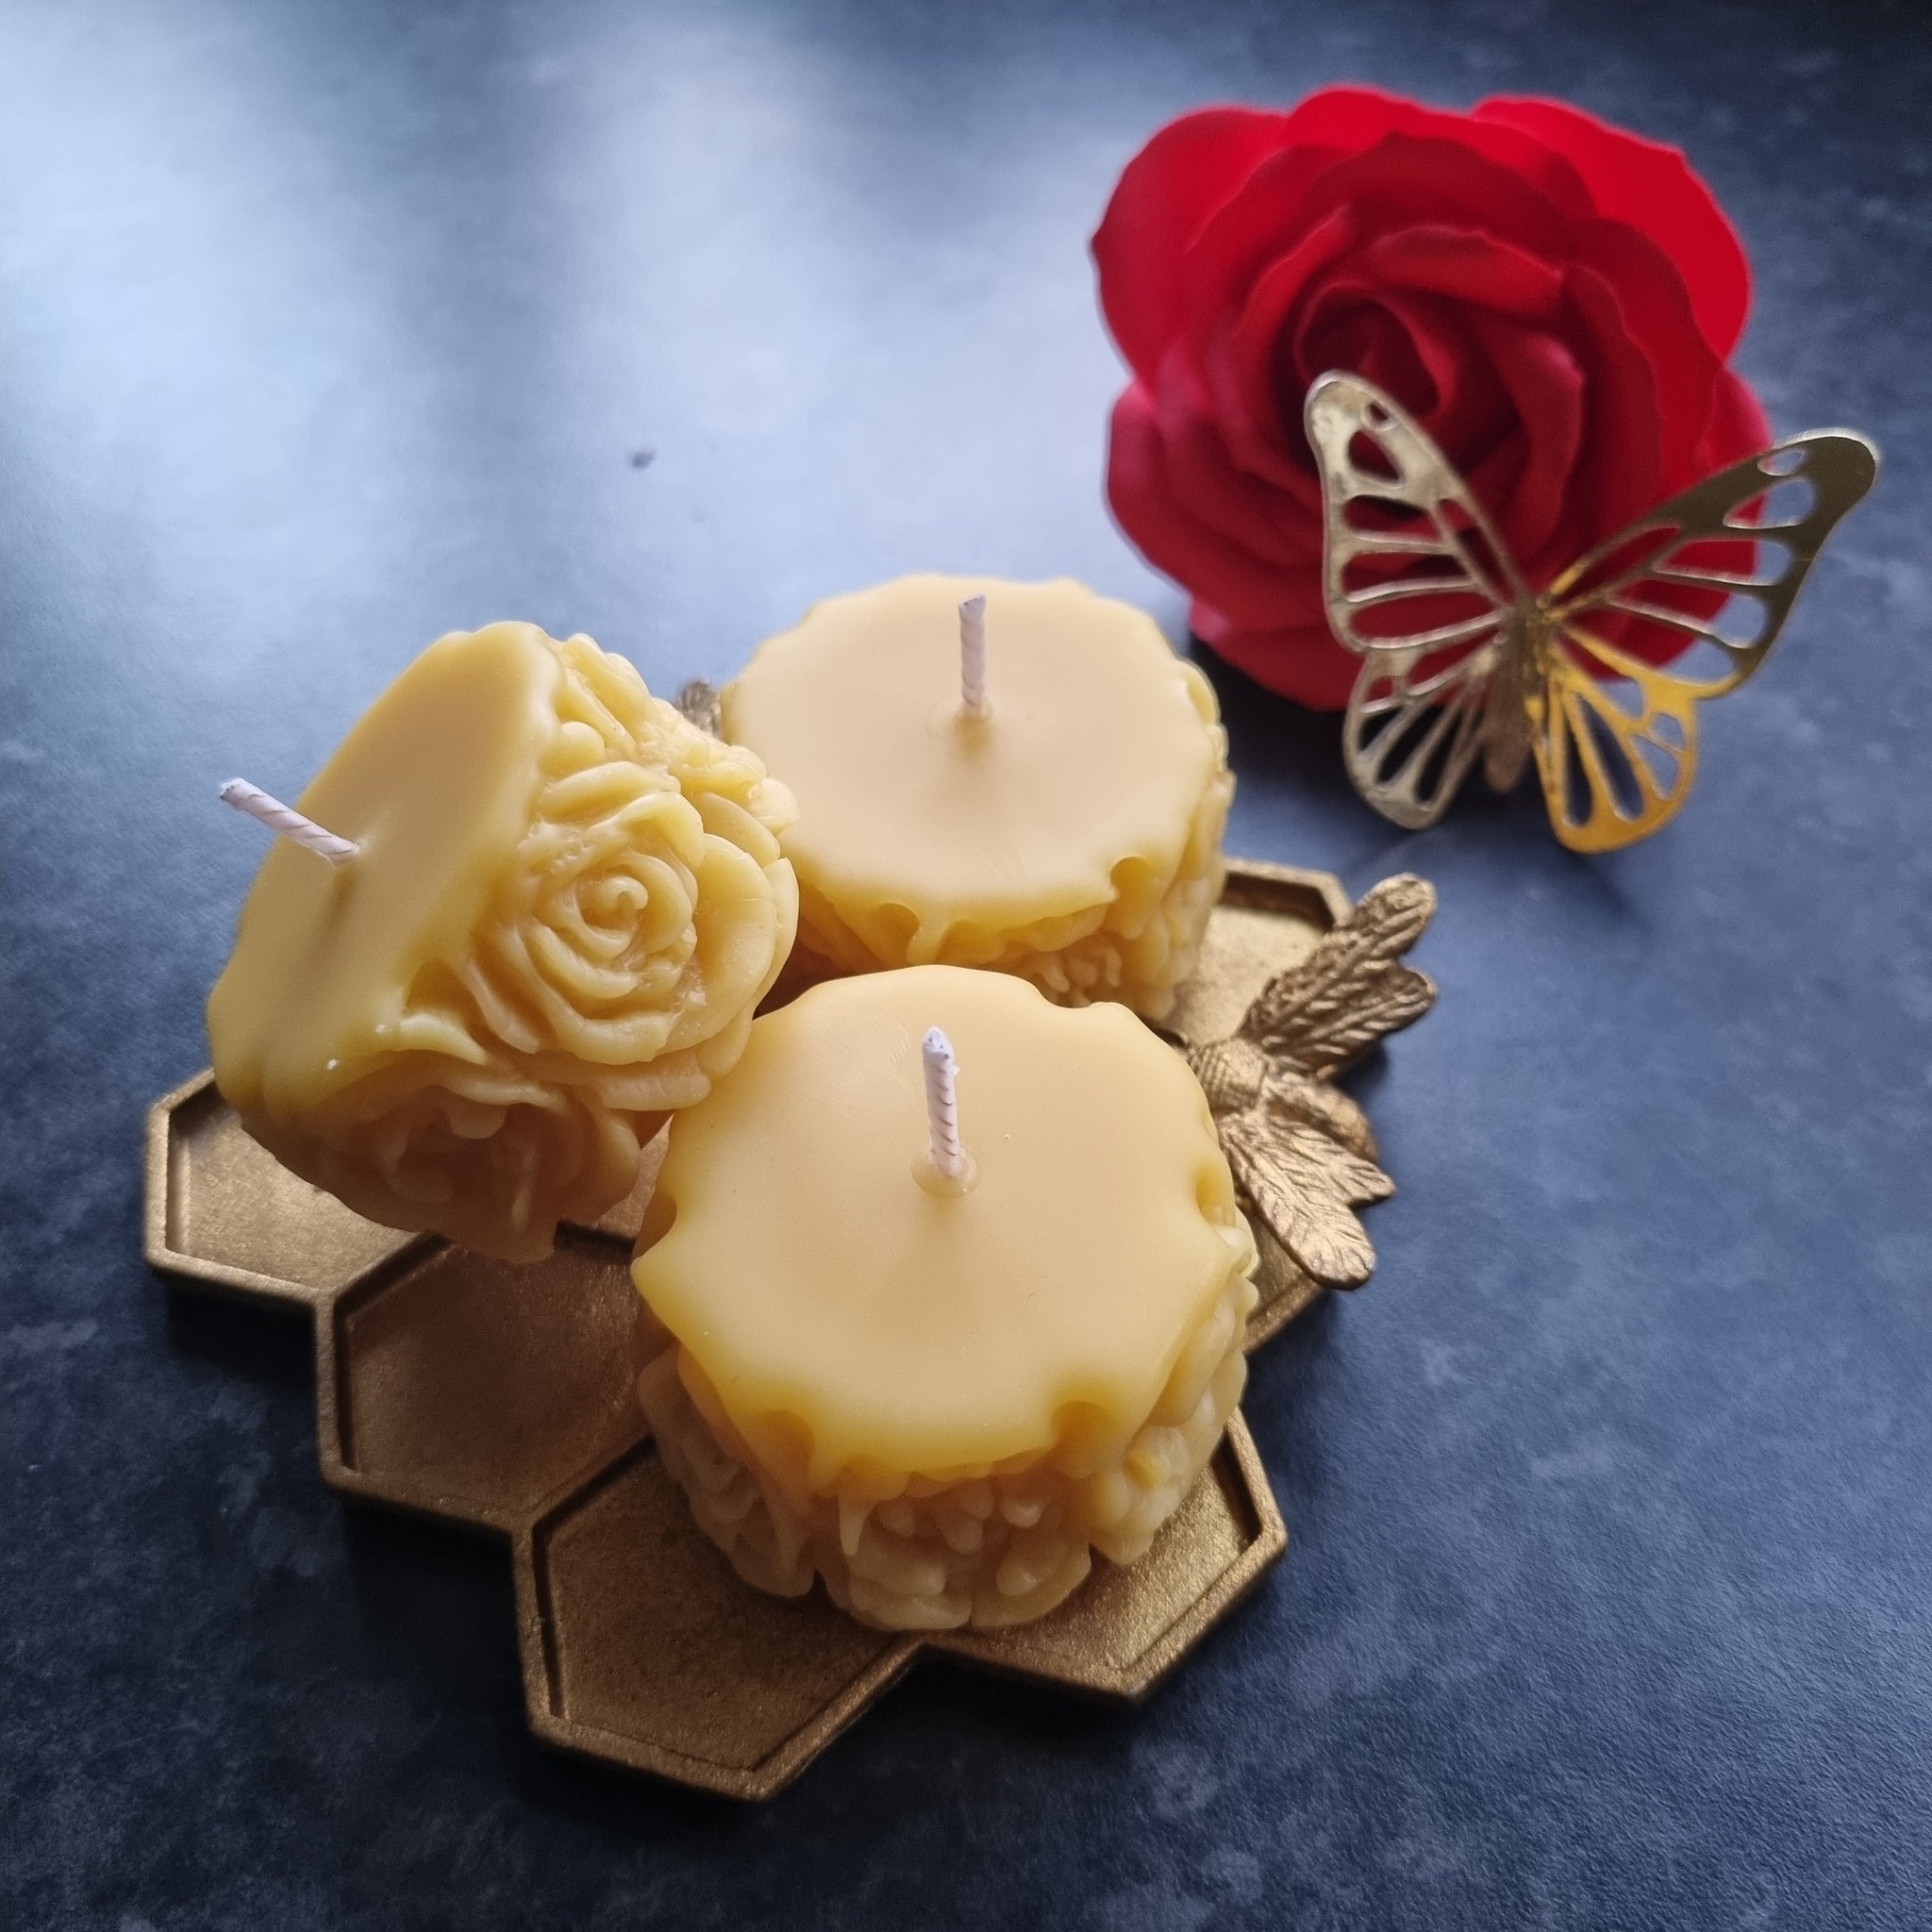 Pure Beeswax Candles - 9 oz.